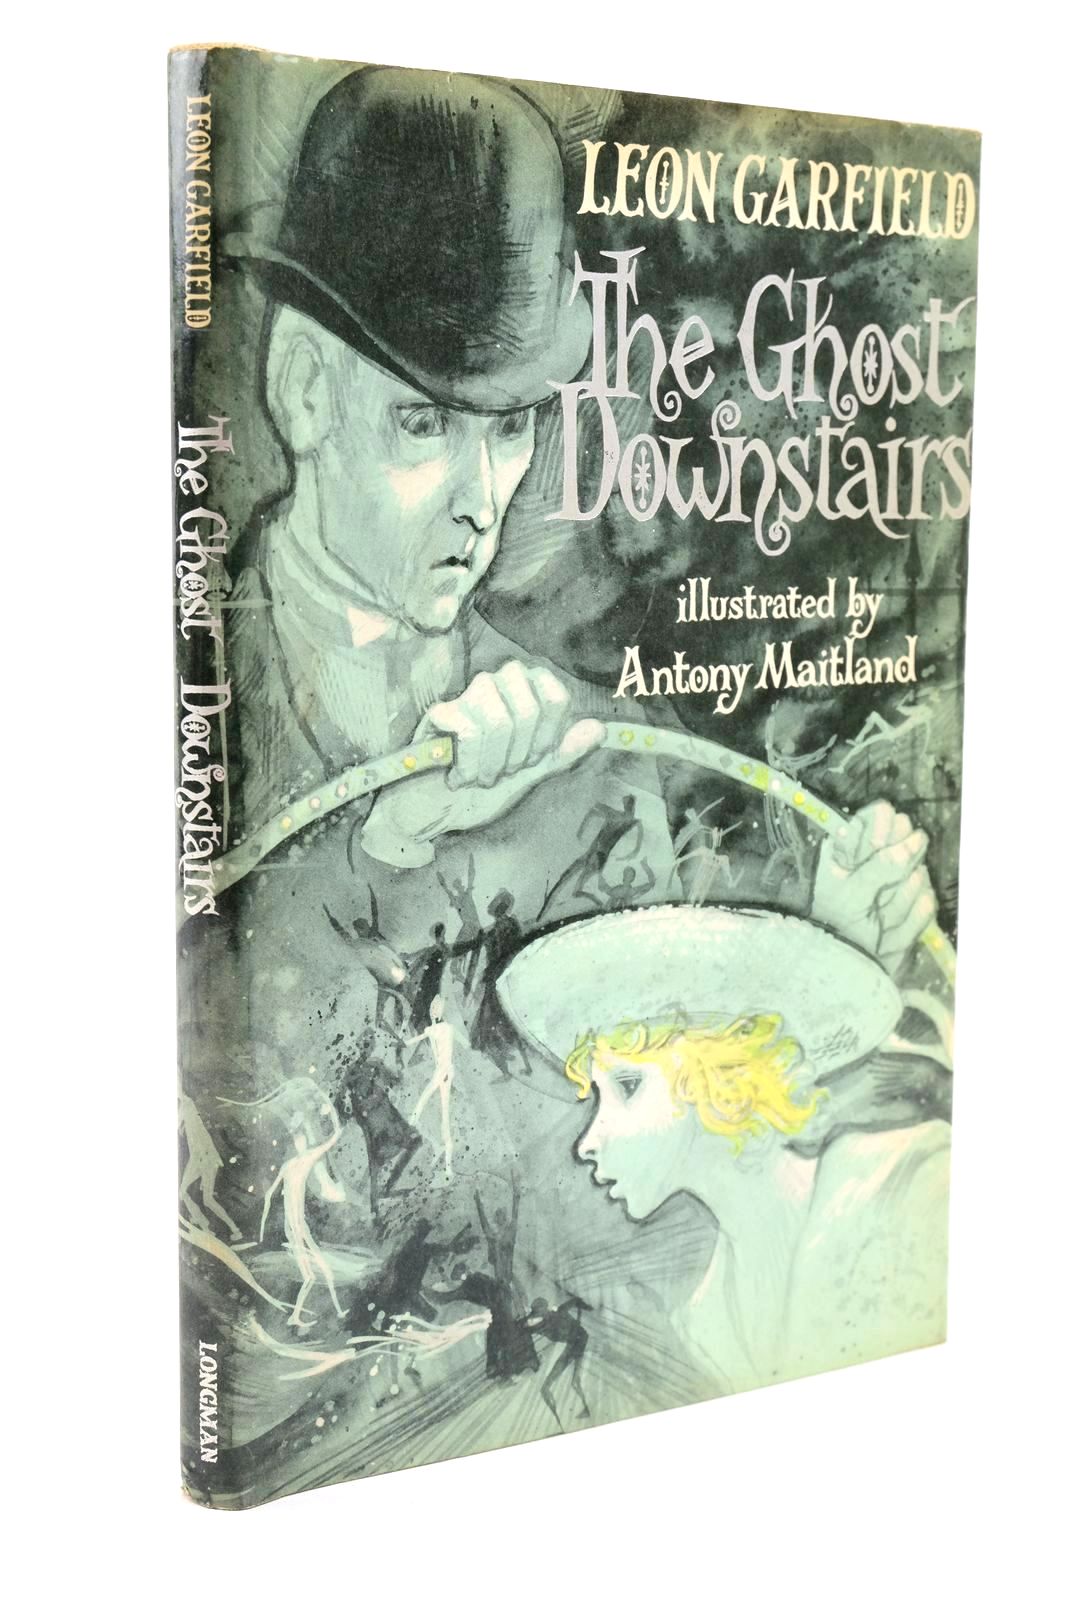 Photo of THE GHOST DOWNSTAIRS written by Garfield, Leon illustrated by Maitland, Antony published by Longman (STOCK CODE: 1323129)  for sale by Stella & Rose's Books